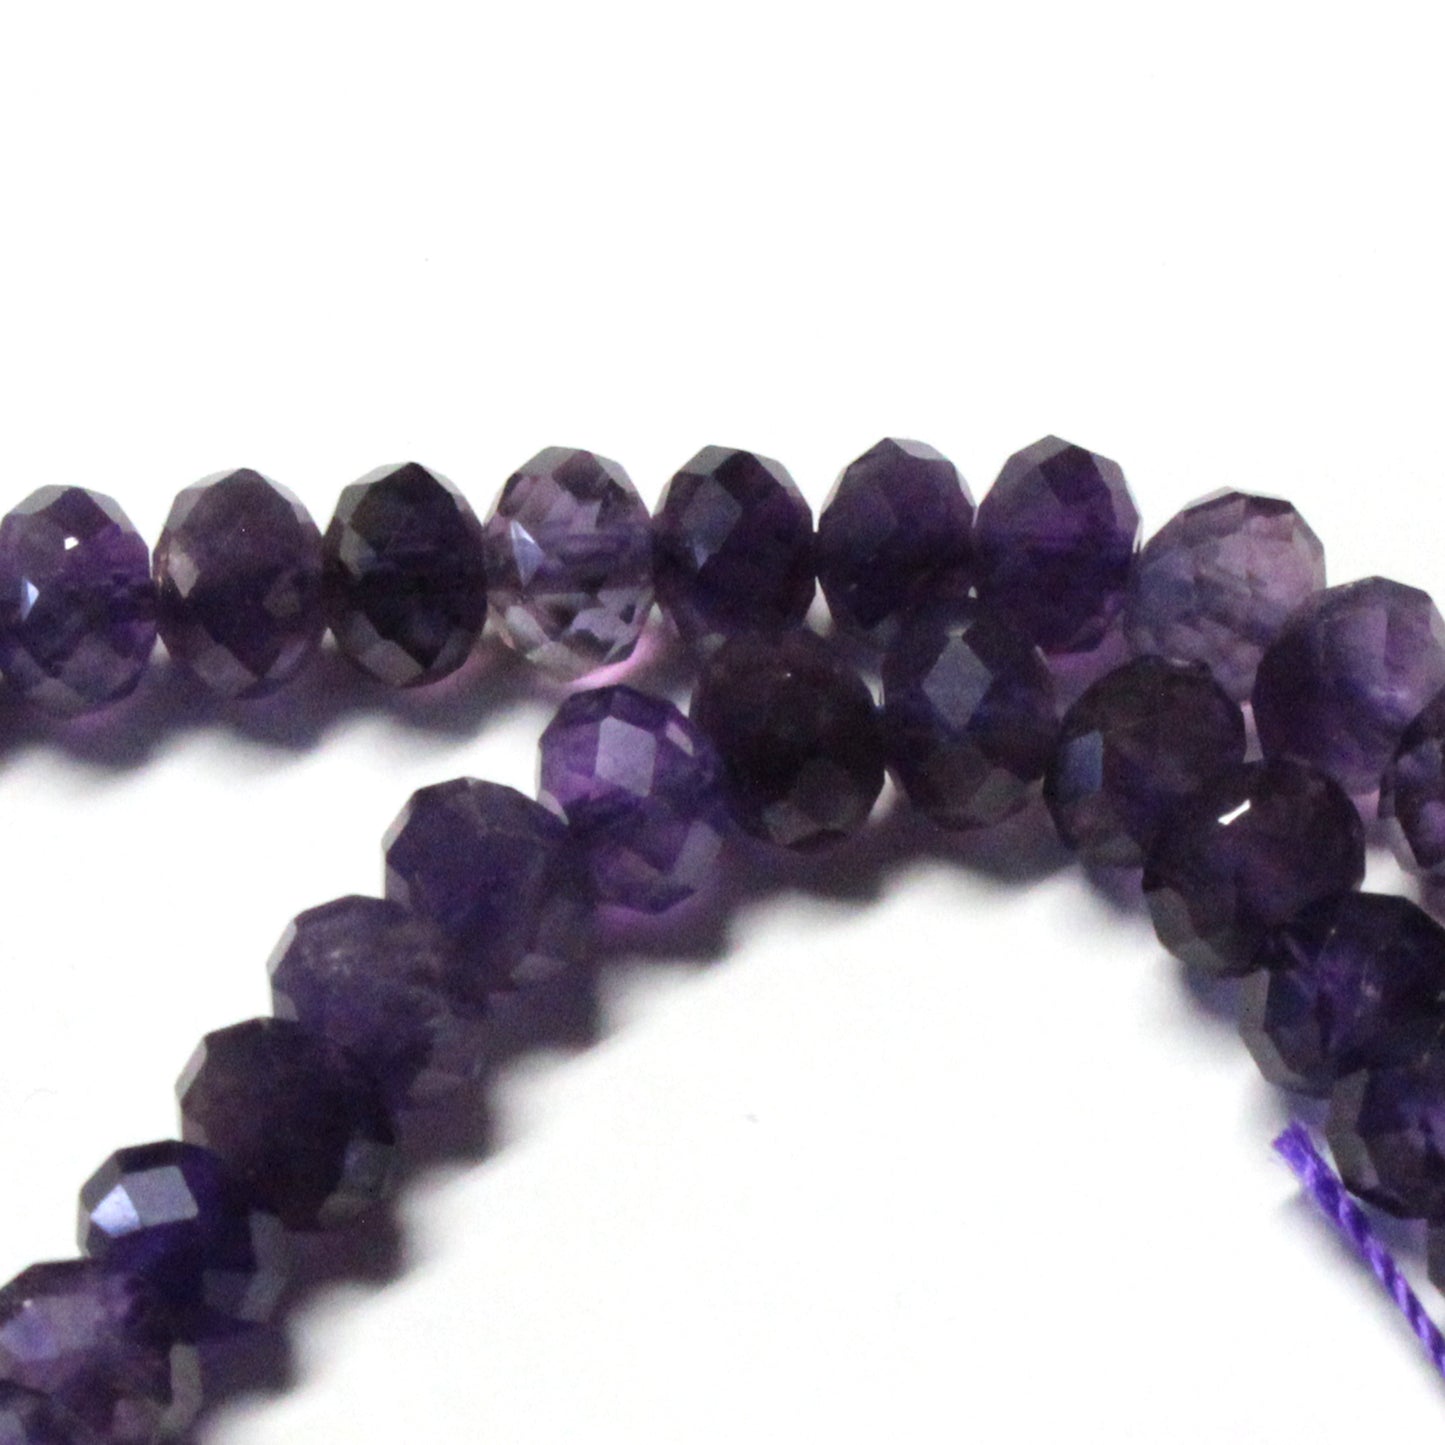 Amethyst Microfaceted Rondelle Beads / 4 x 6mm laser cut / 15 Inch Strand